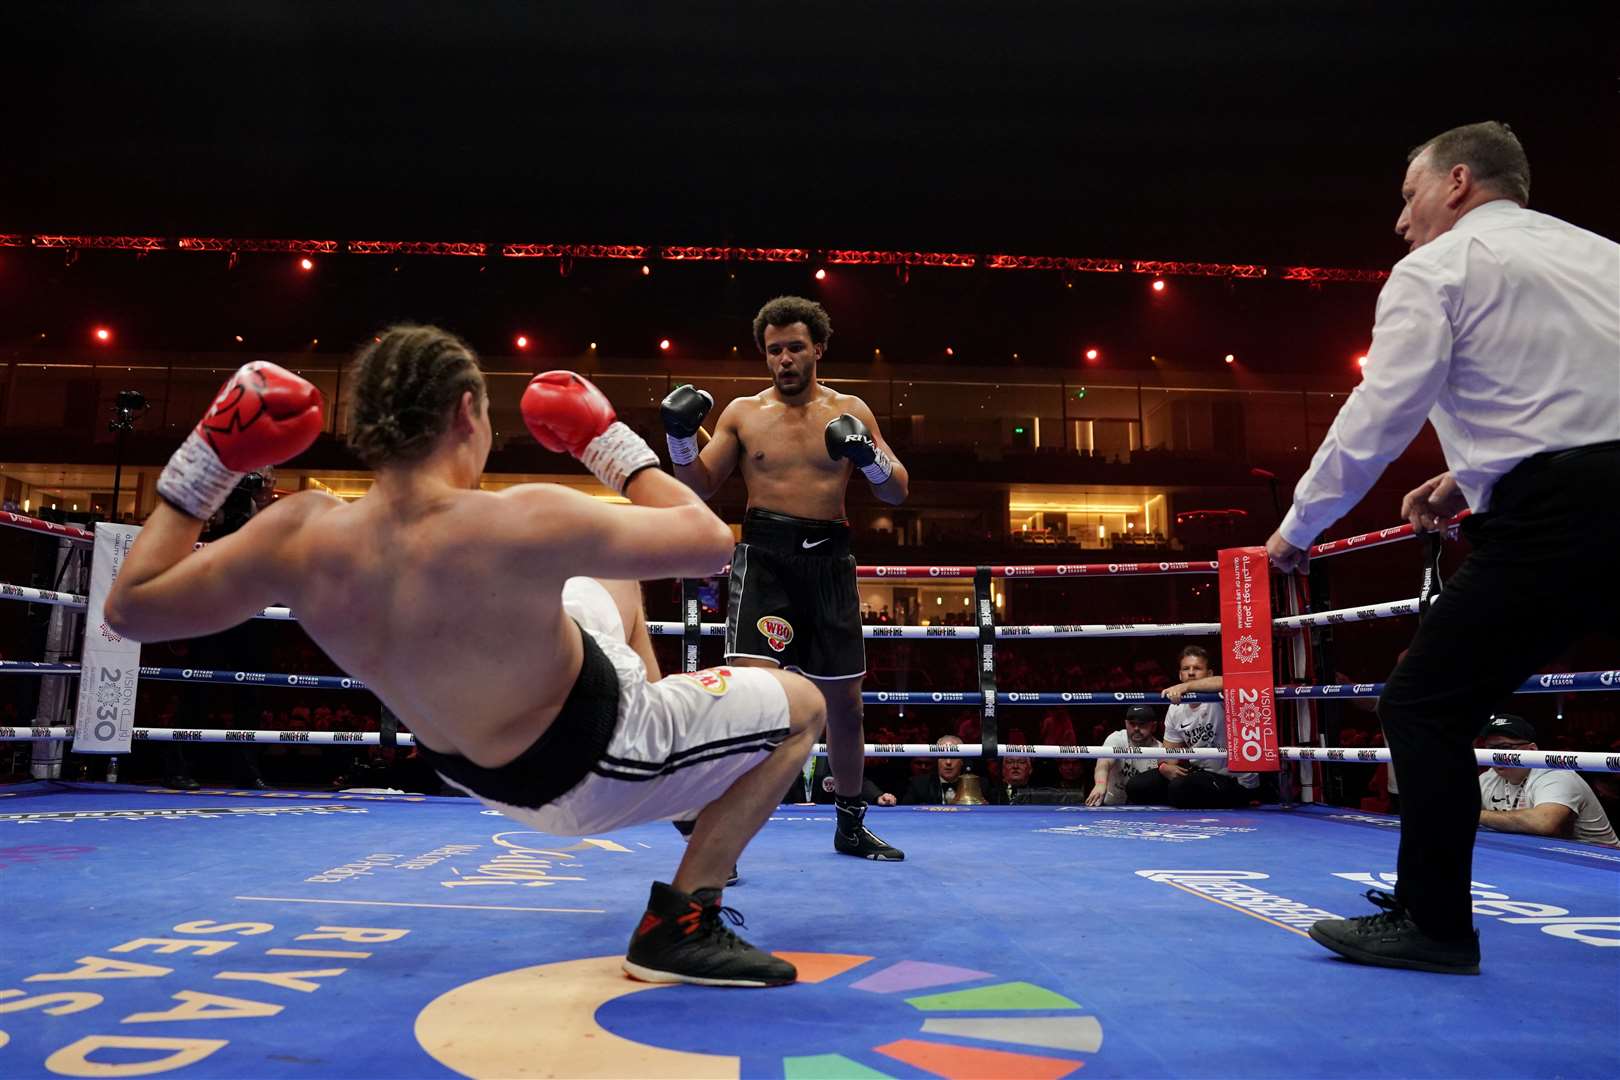 Moses Itauma with the punch to finish Ilja Mezencev off at the Kingdom Arena Picture: Queensberry